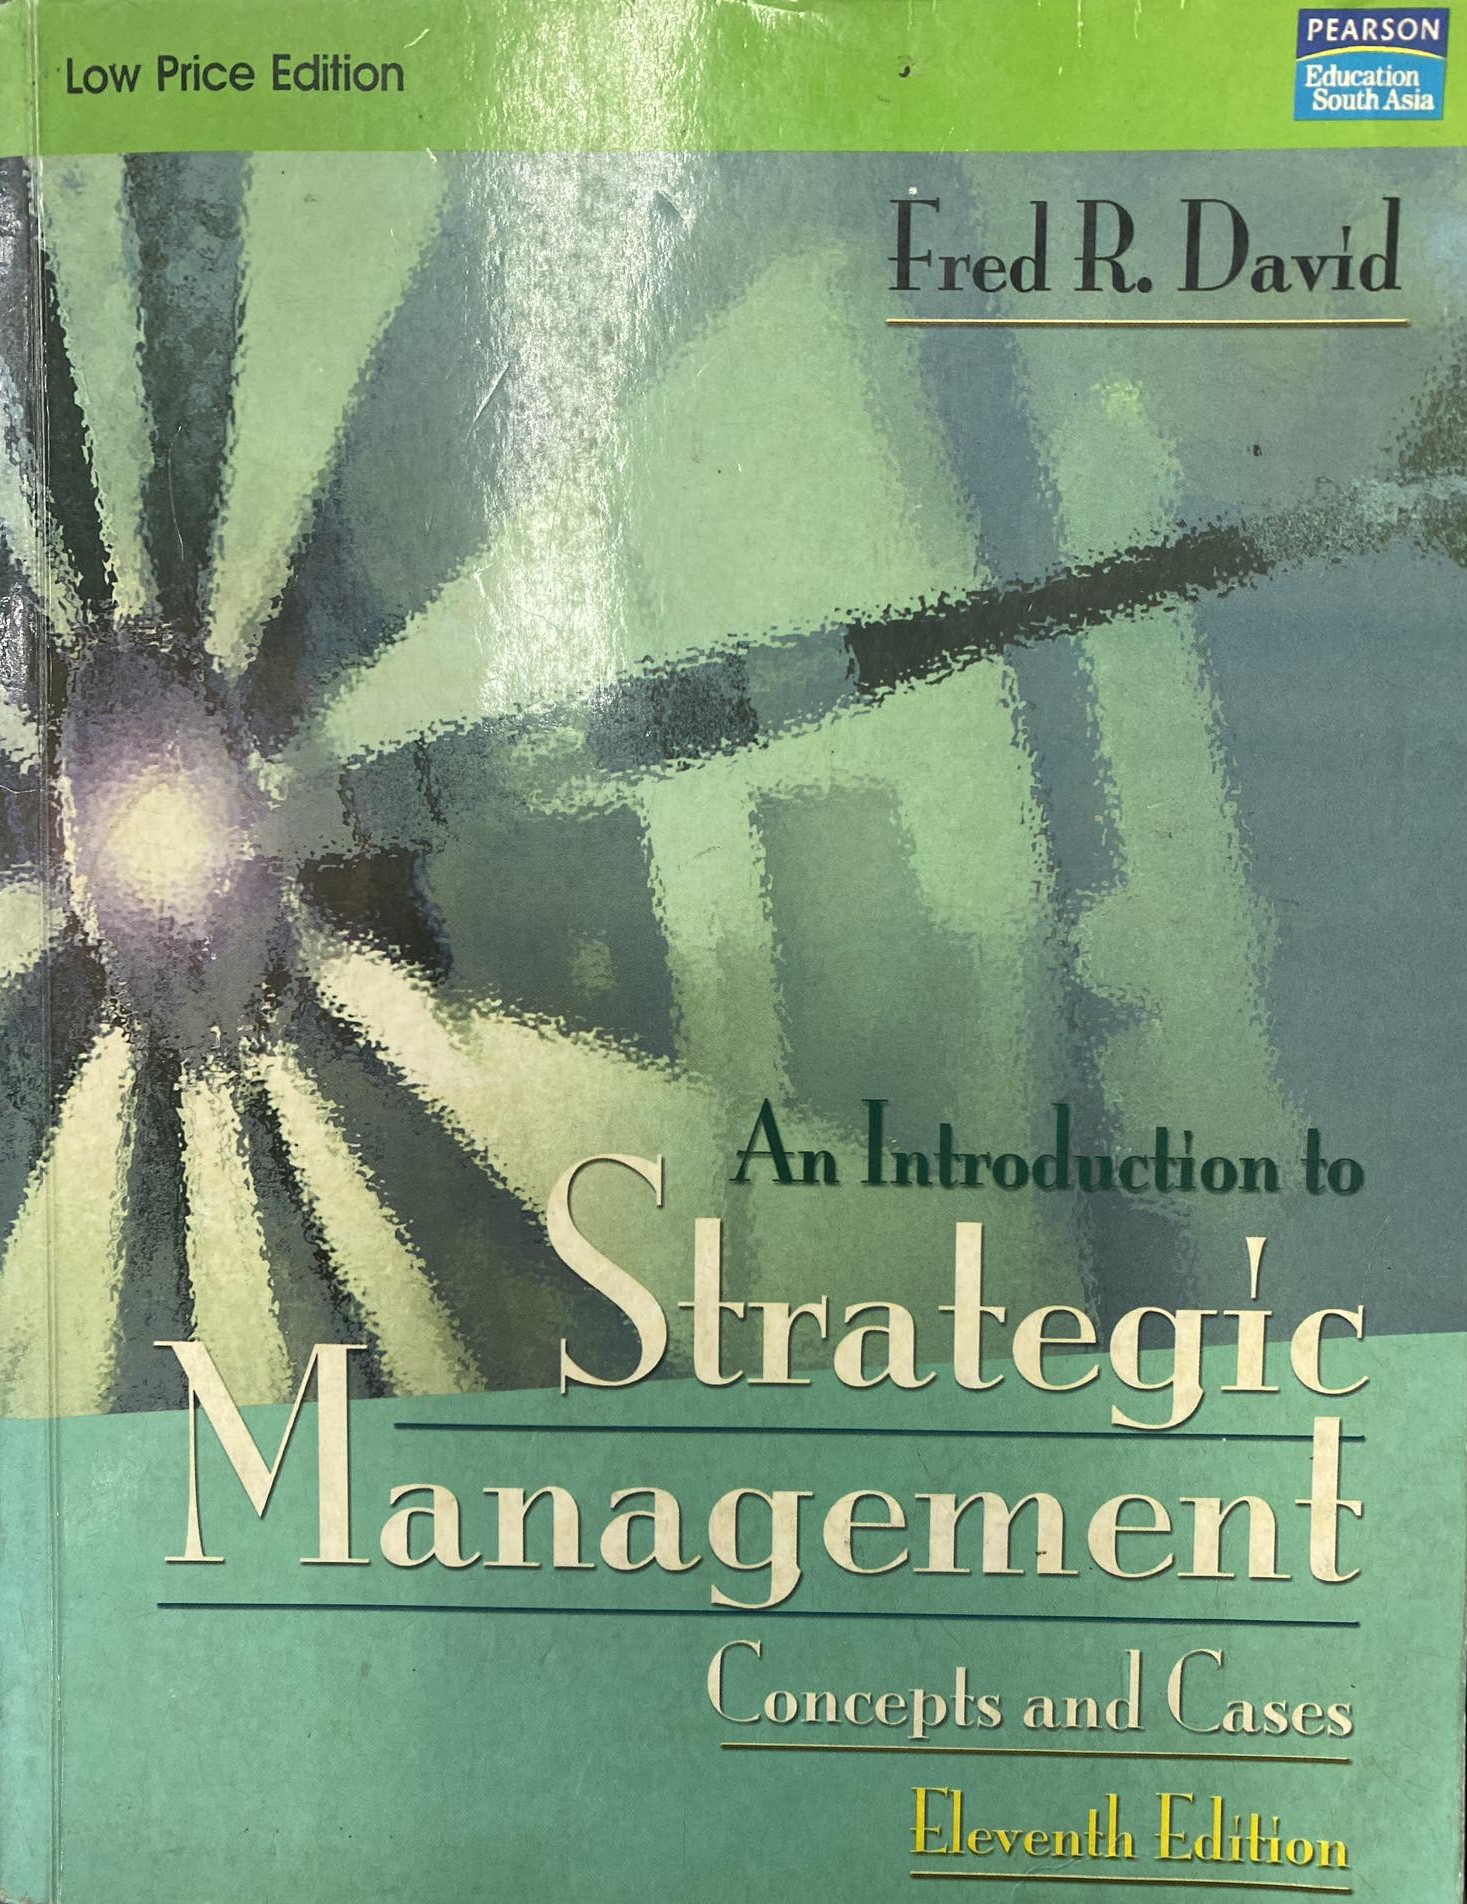 An introduction to strategic management concepts and cases